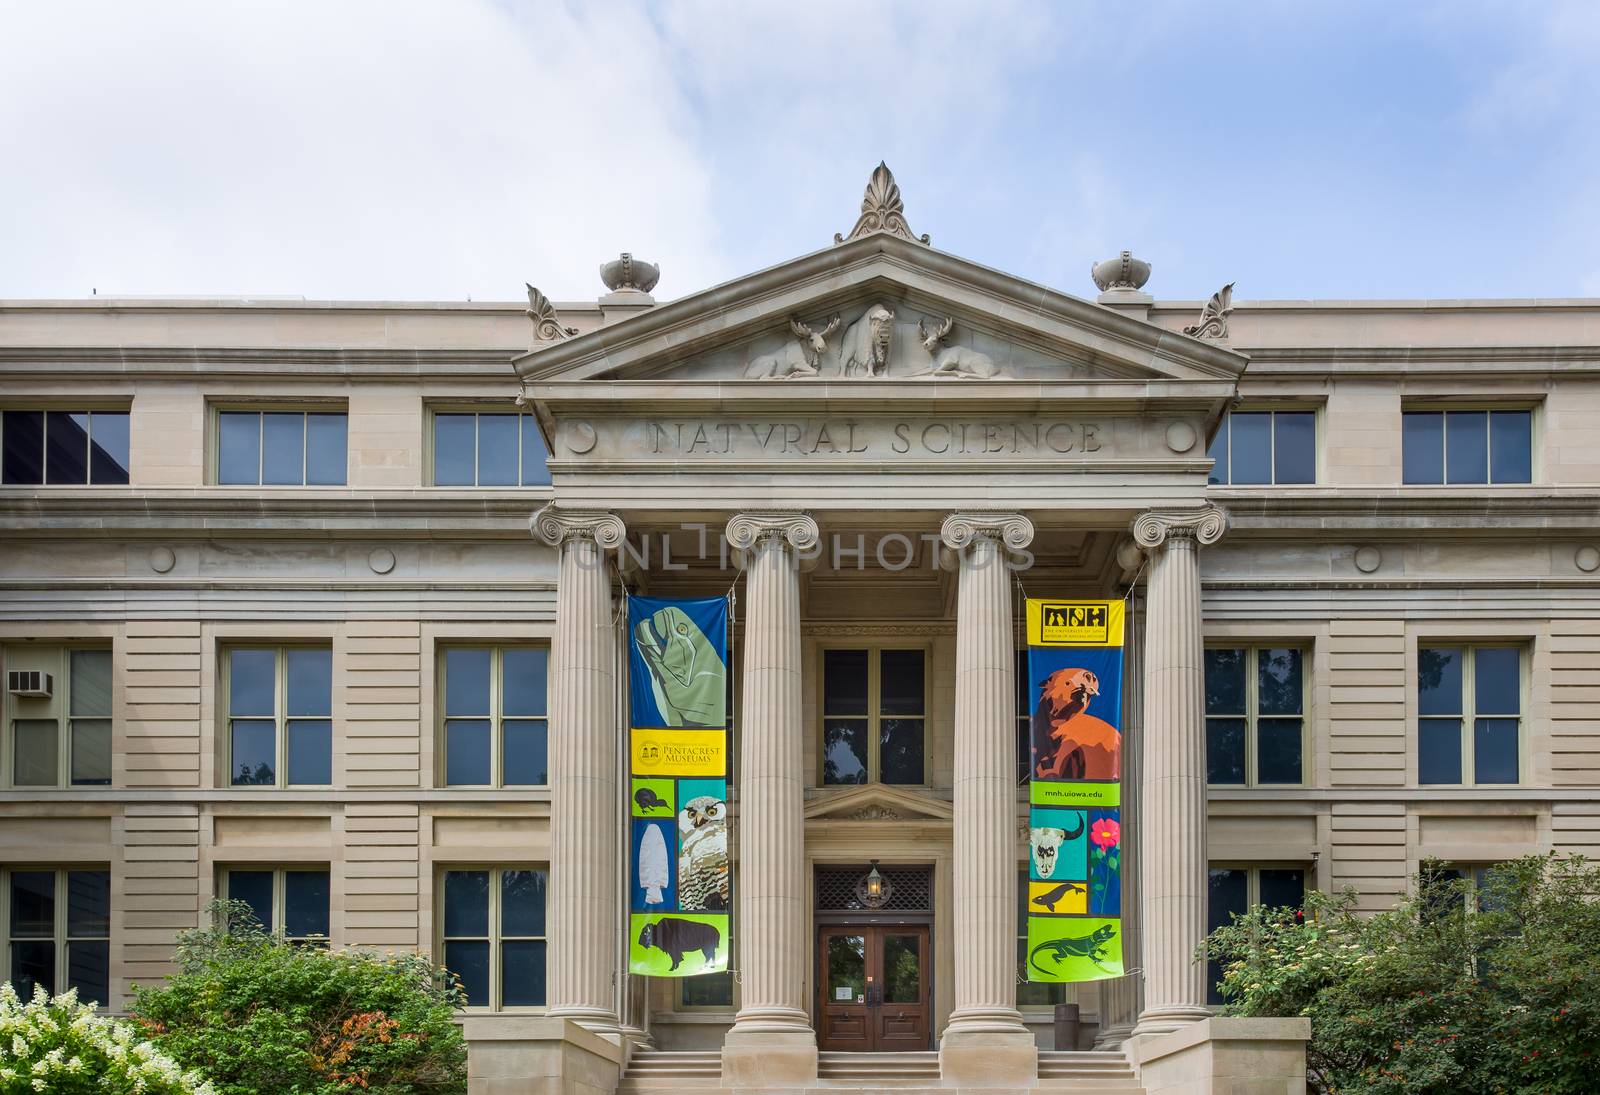 IOWA CITY, IA/USA - AUGUST 7, 2015: Natural Sciences building at the University of Iowa. The University of Iowa is a flagship public research university.